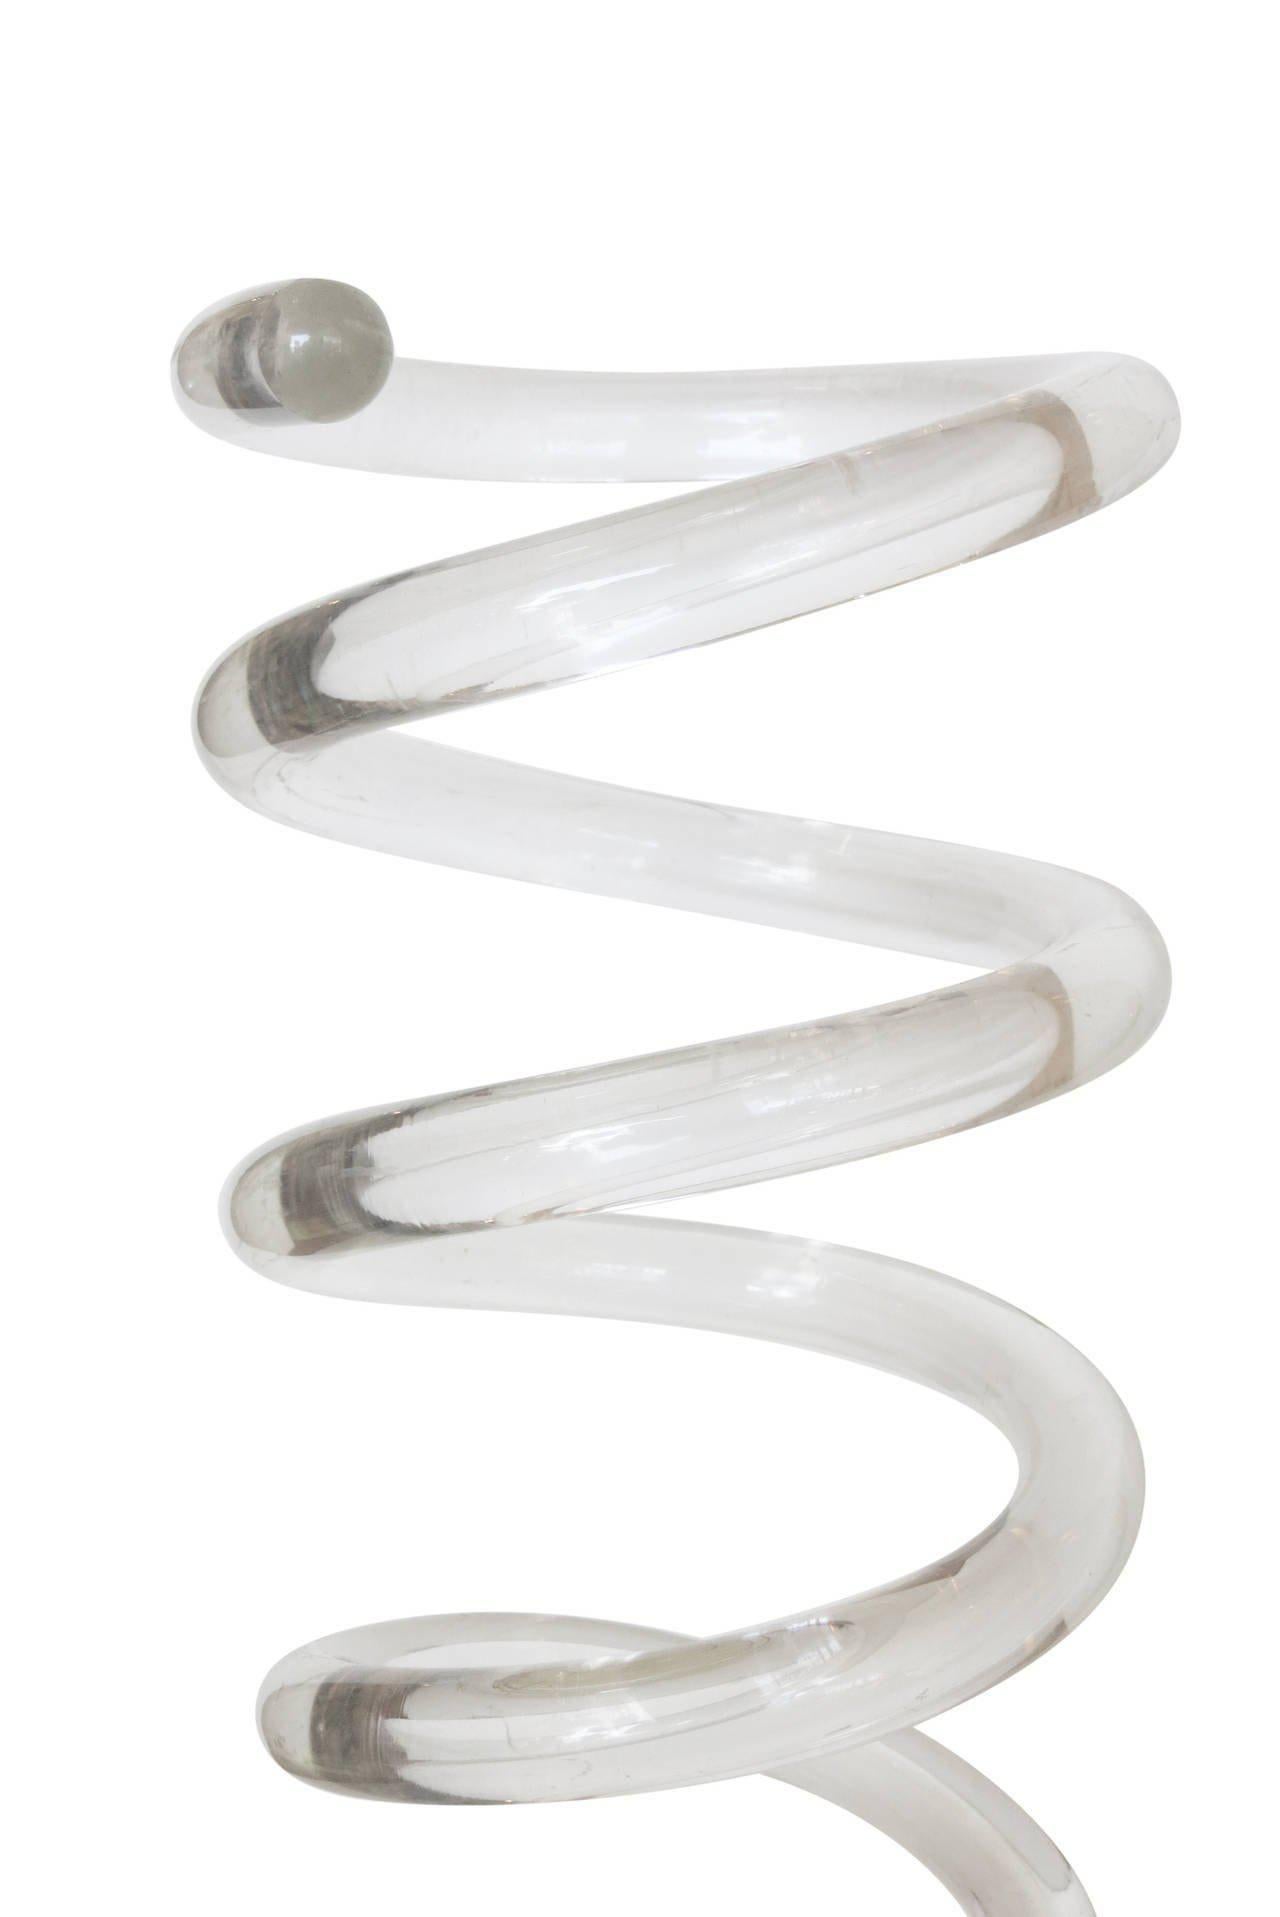 Acrylic 1950s Dorothy Thorpe Lucite Spiral Spring Umbrella Stand For Sale